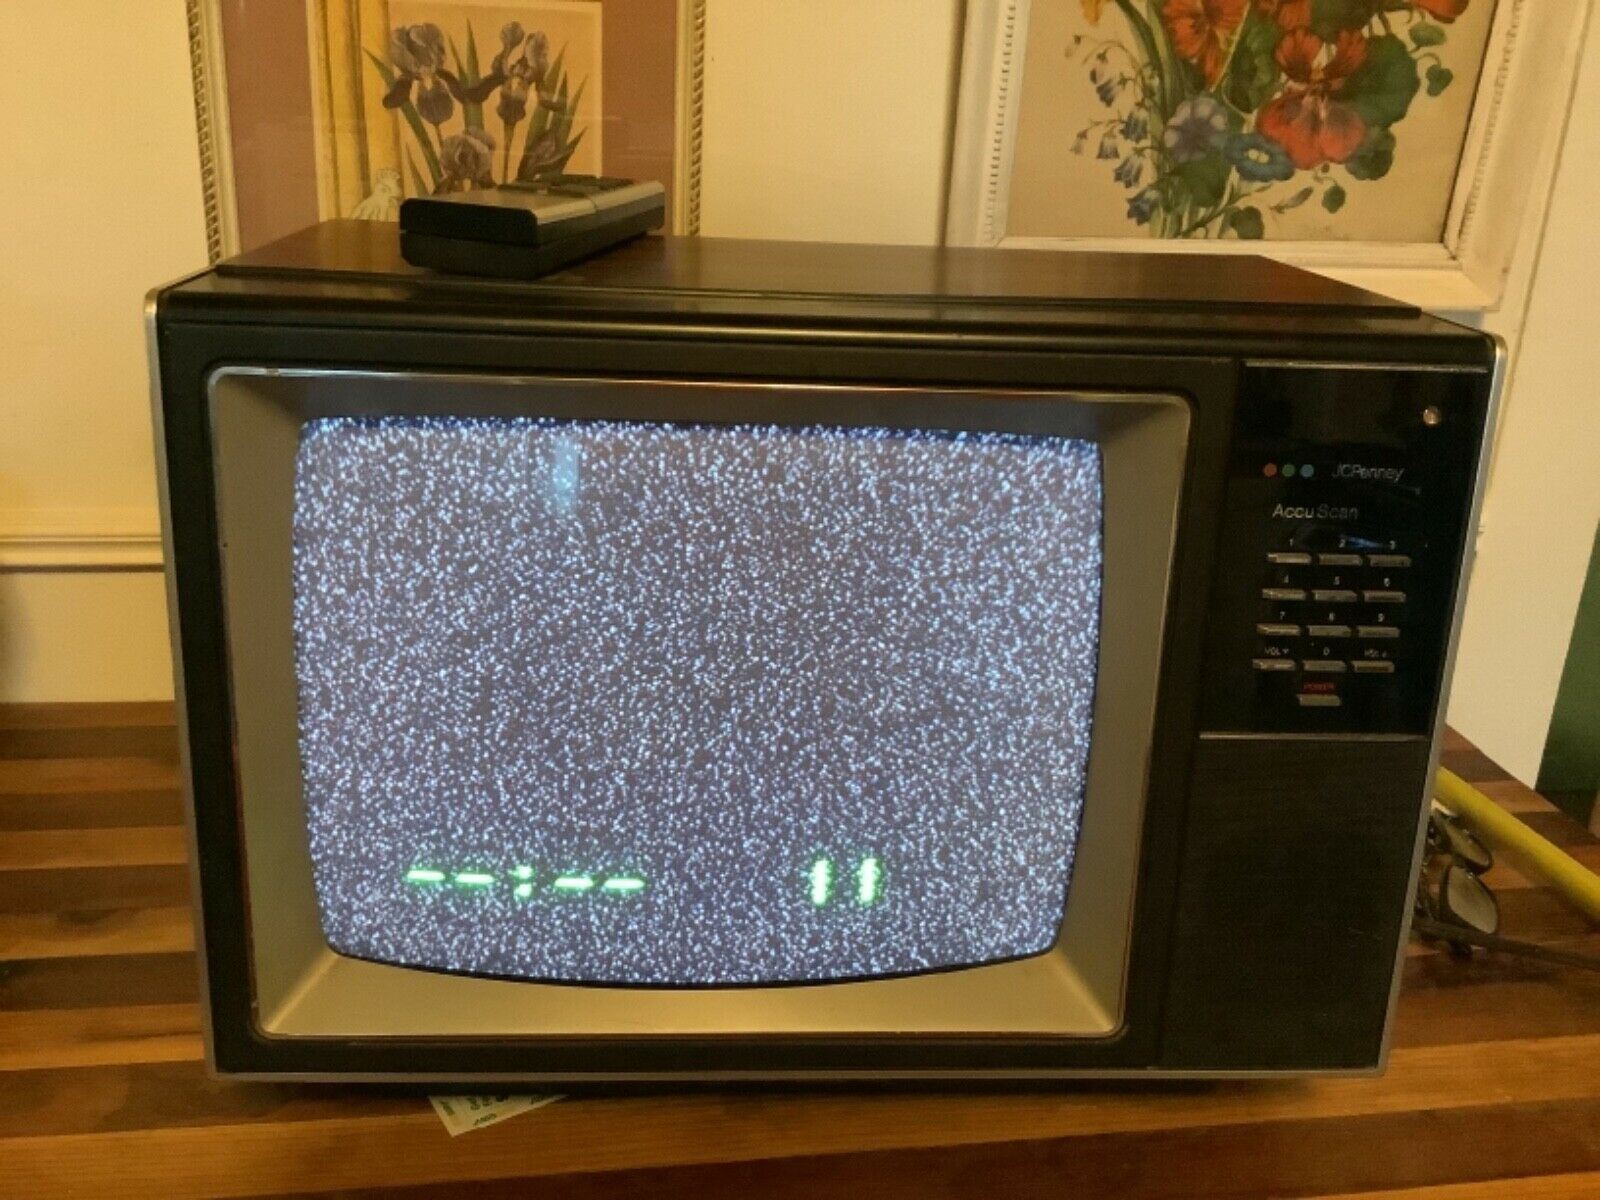 Vintage JCPenney Color Television TV set  1980'S Retro Accuscan Accu Scan remote